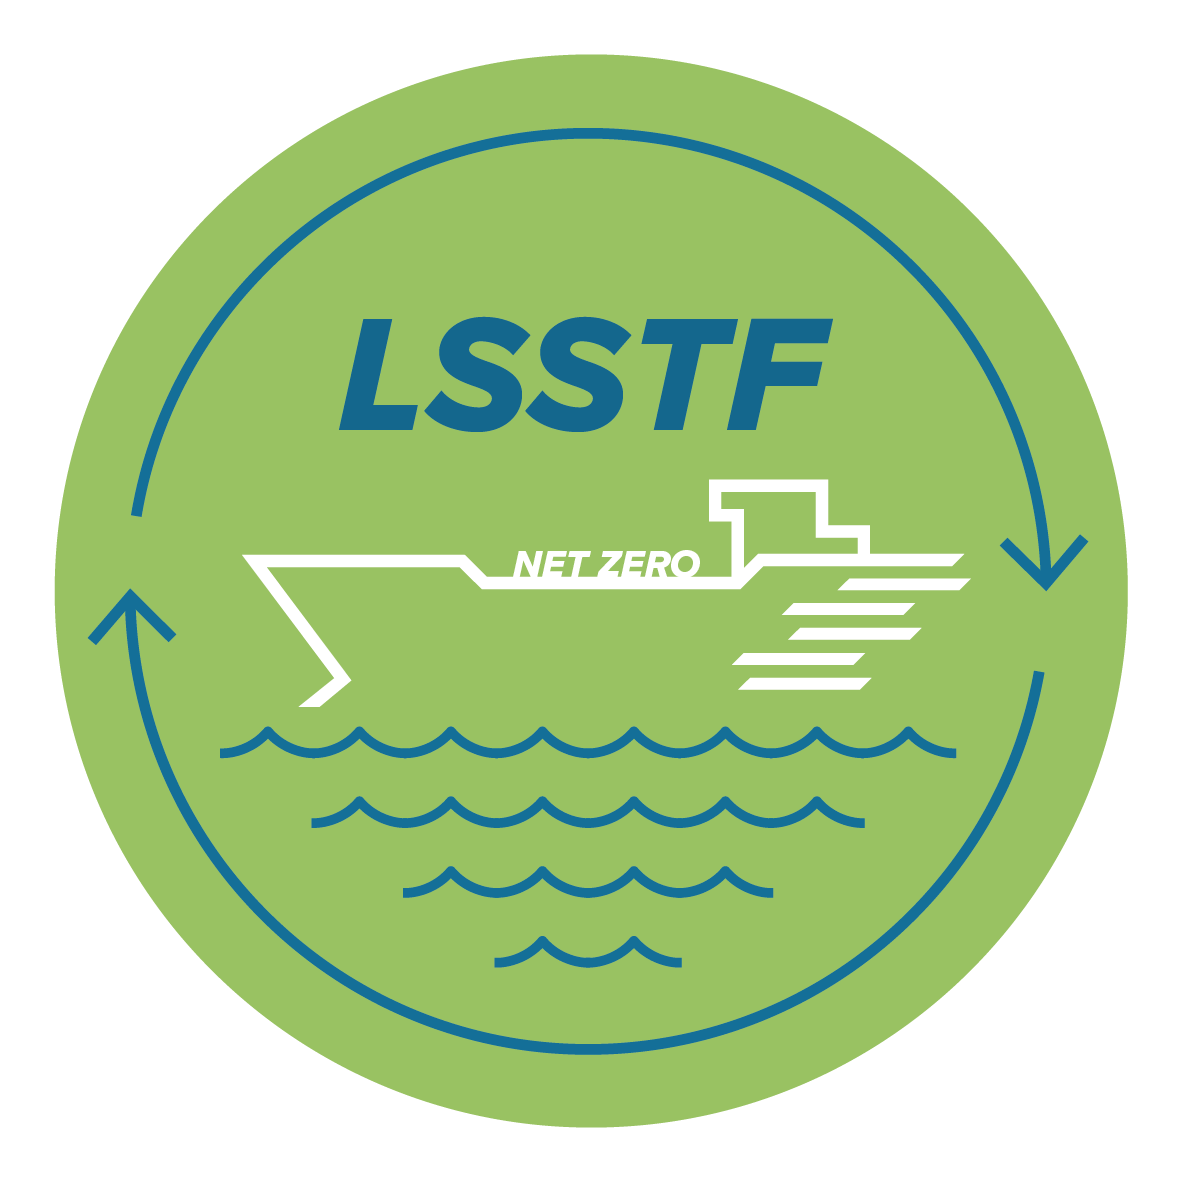 LEC Sustainable Shipping Technologies Forum